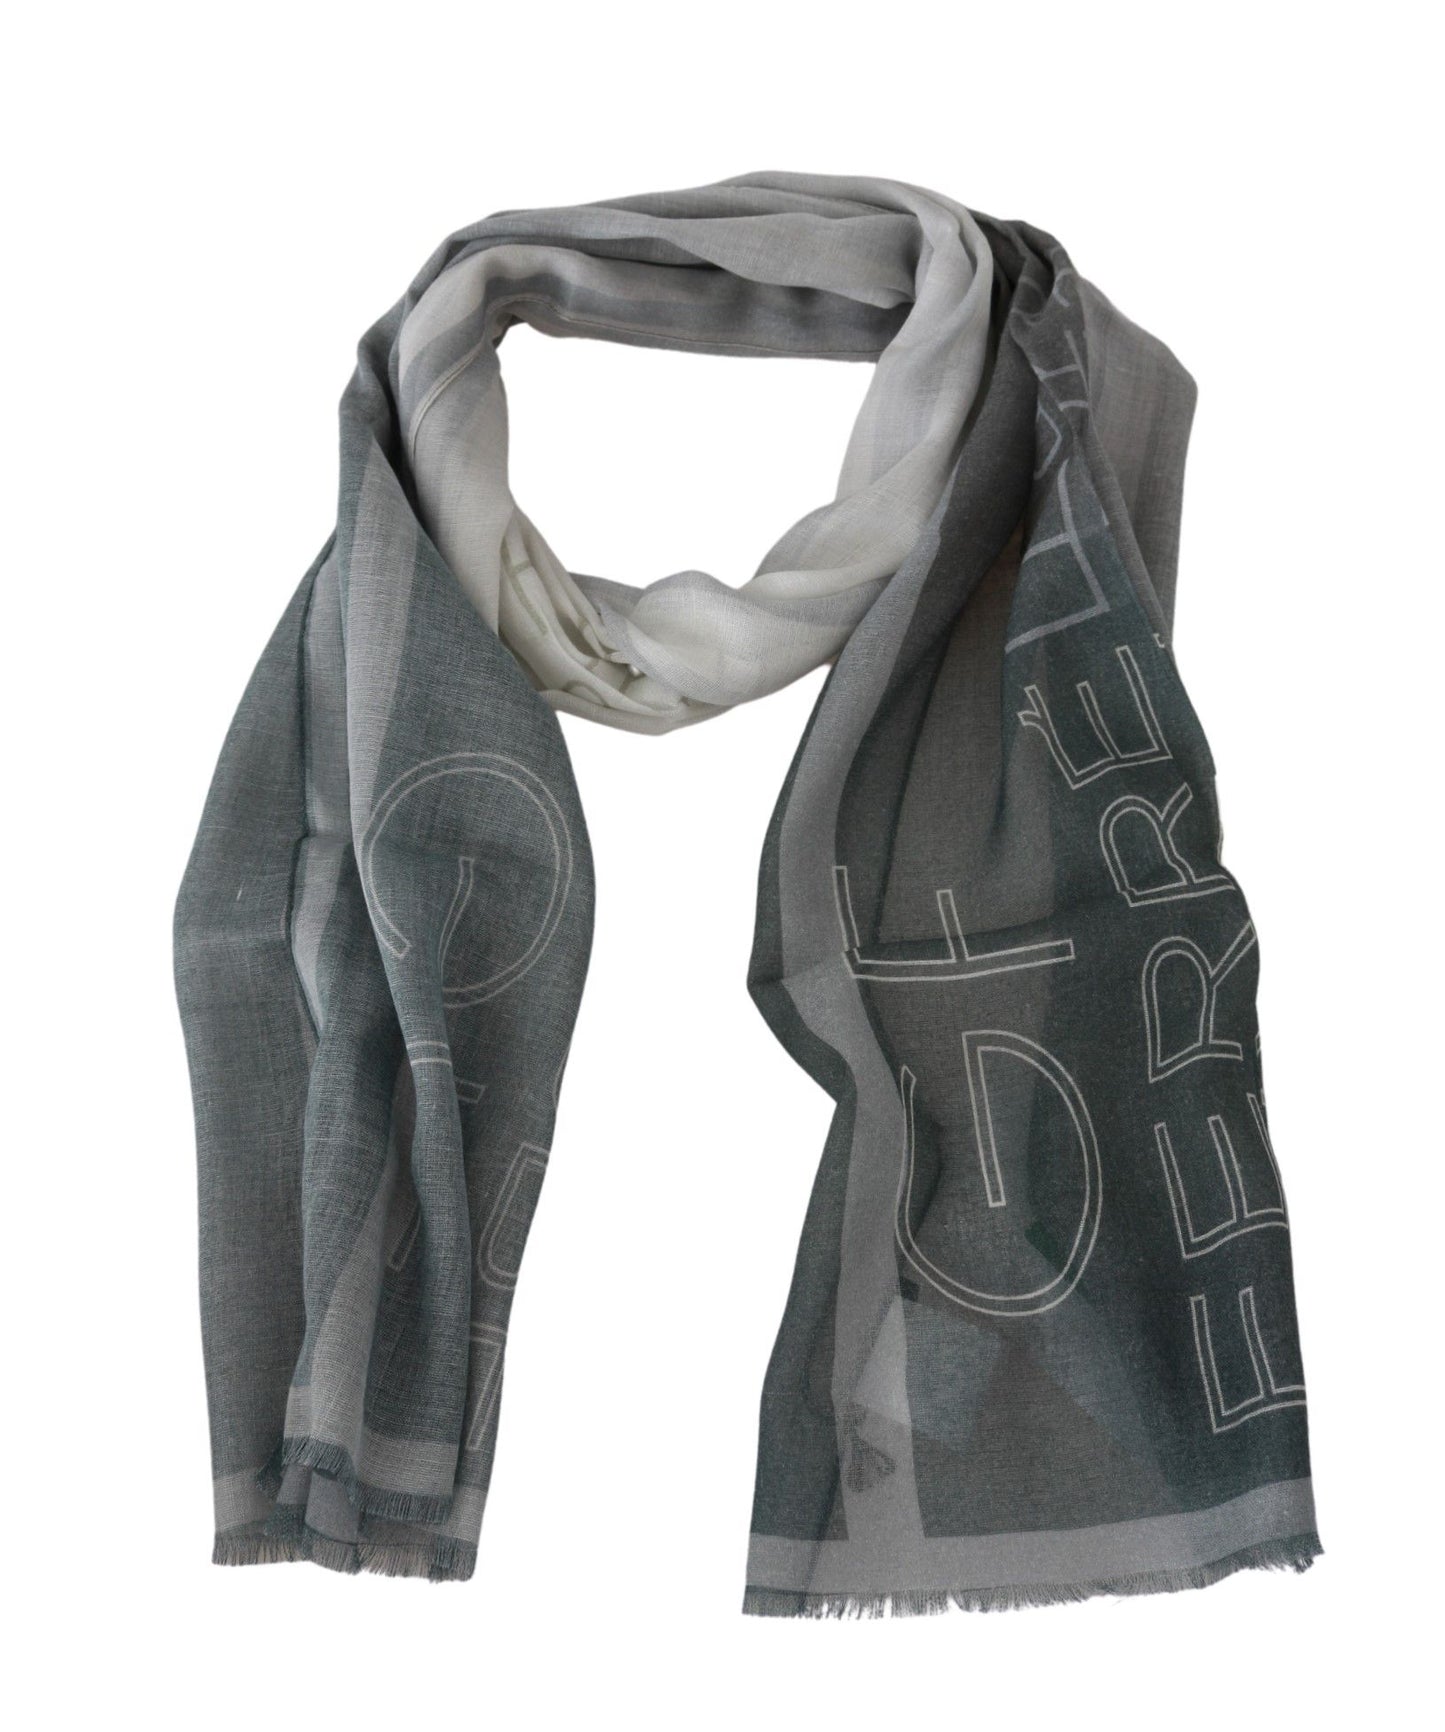 GF Ferre Grey Wool Viscose Foulard Patterned Branded Scarf - Designed by GF Ferre Available to Buy at a Discounted Price on Moon Behind The Hill Online Designer Discount Store